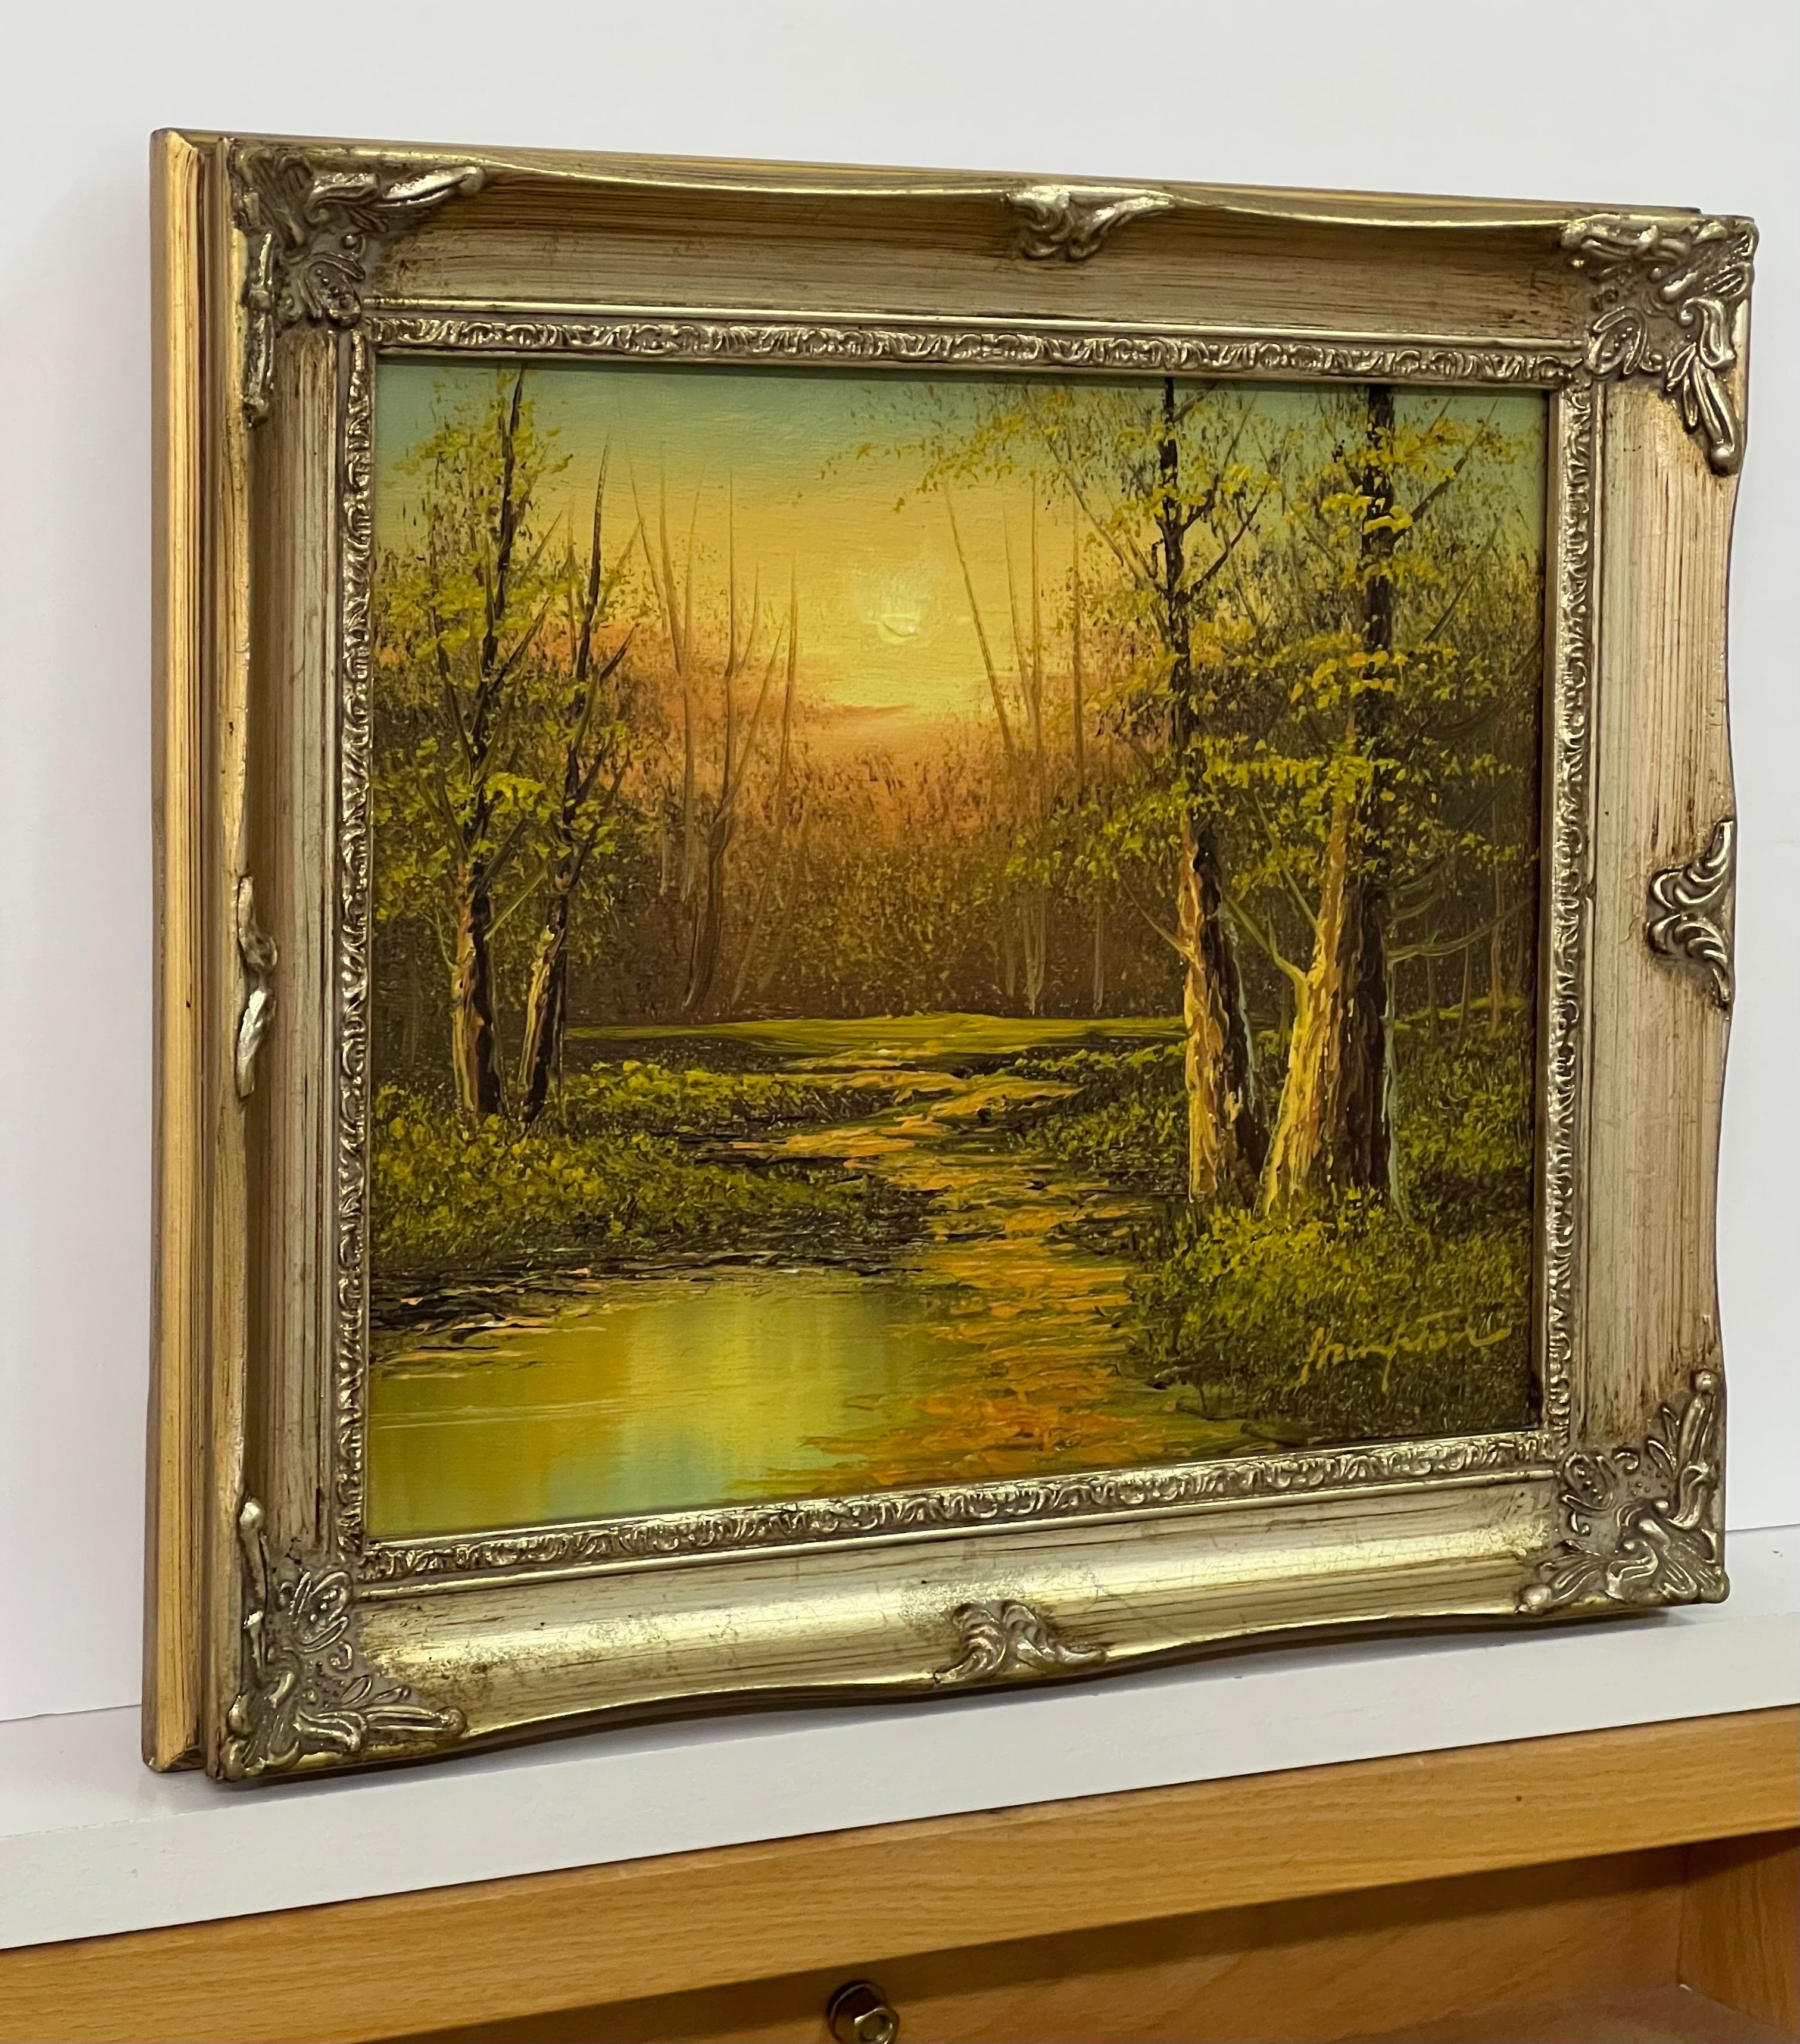 Vintage Oil Painting of River Sunset in the Woods of the English Countryside by 20th Century British Artist. Painted using warm orange and green colours creating a unique atmosphere. 

Art measures 10 x 8 inches 
Frame measures 12 x 10 inches